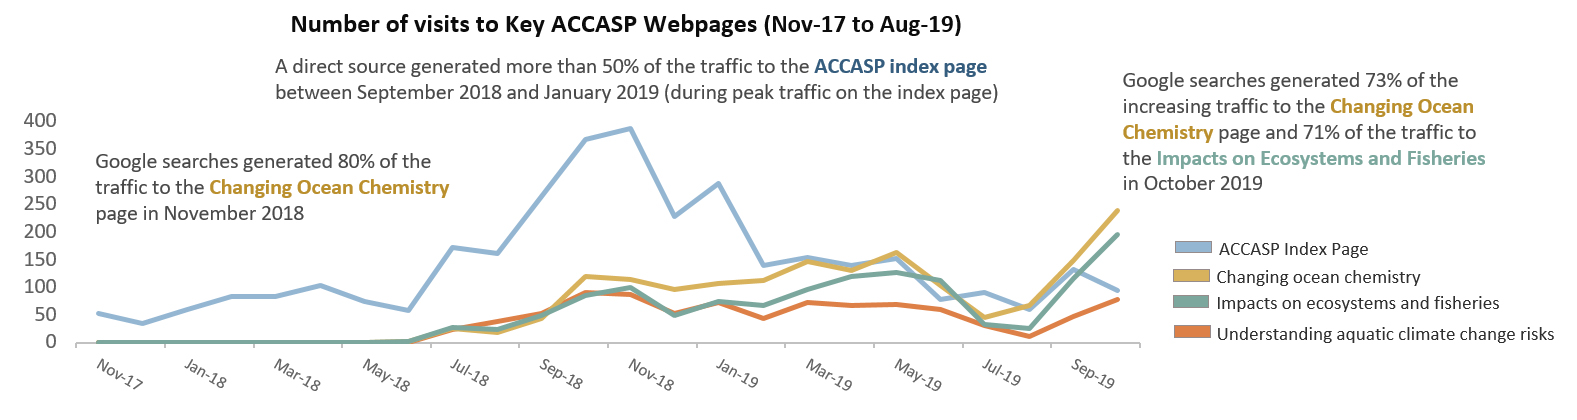 Number of visits to the ACCASP website varies across pages